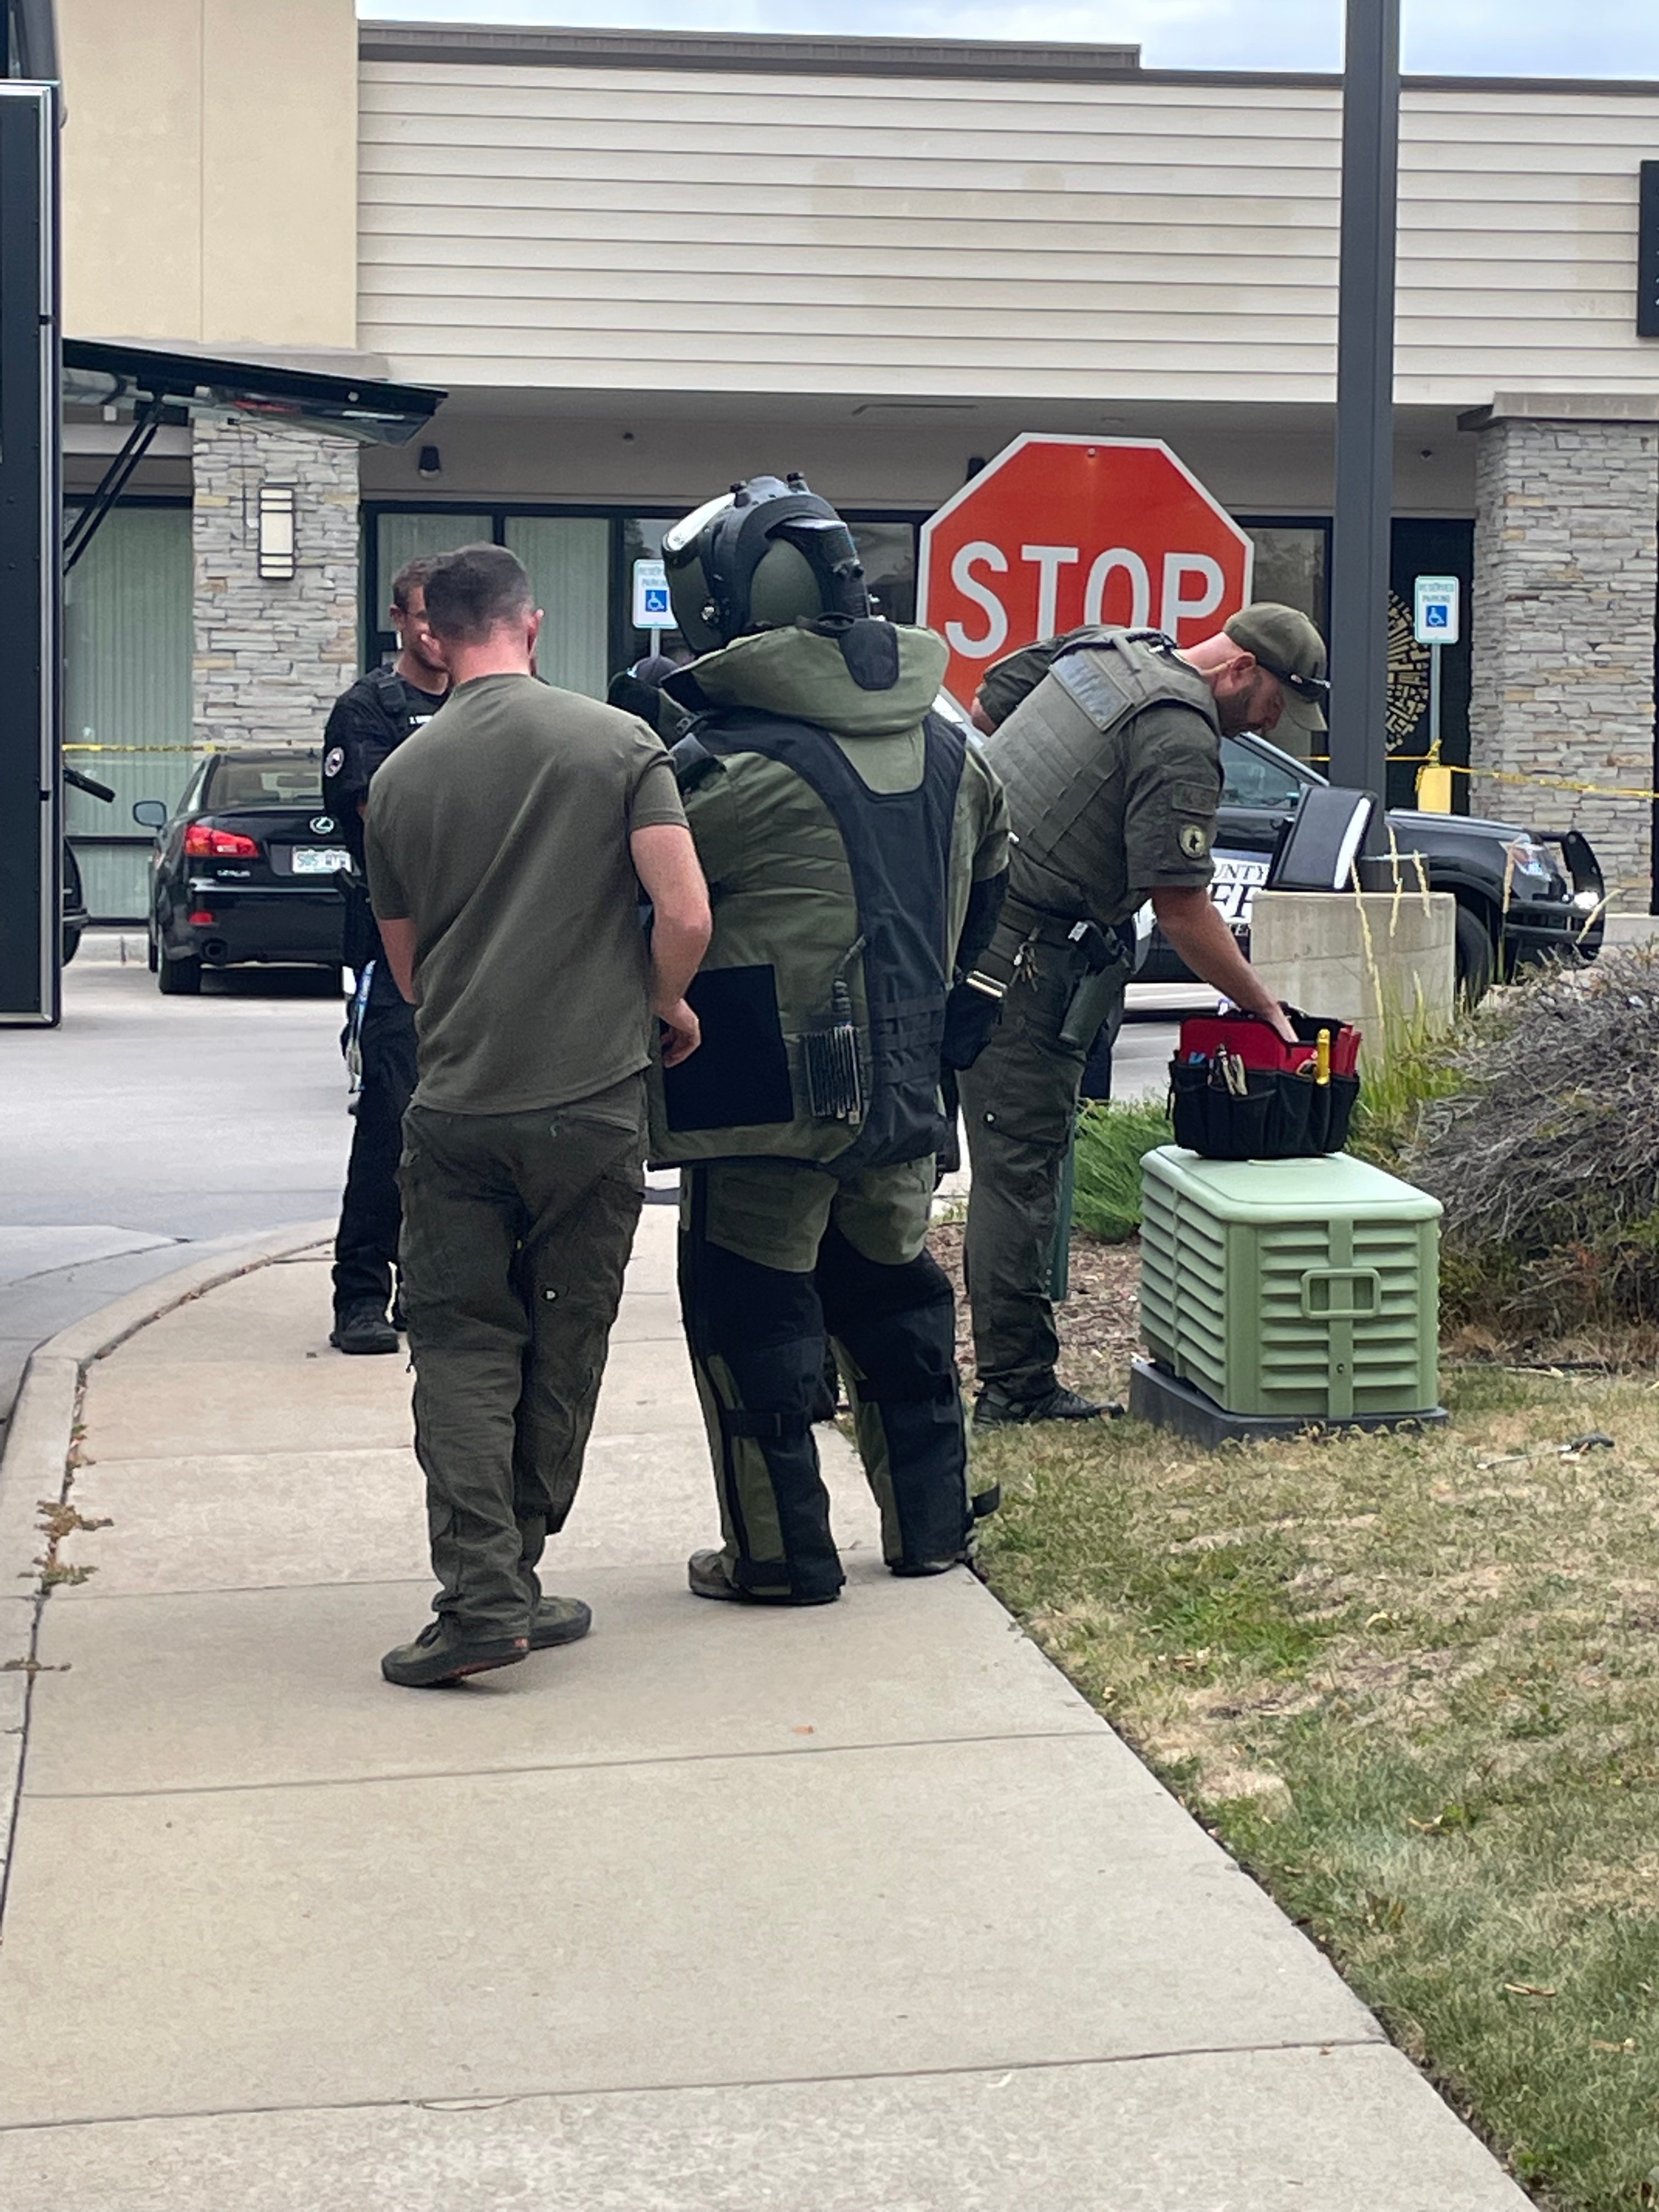 Colorado authorities find pipe bomb behind Safeway, disable it